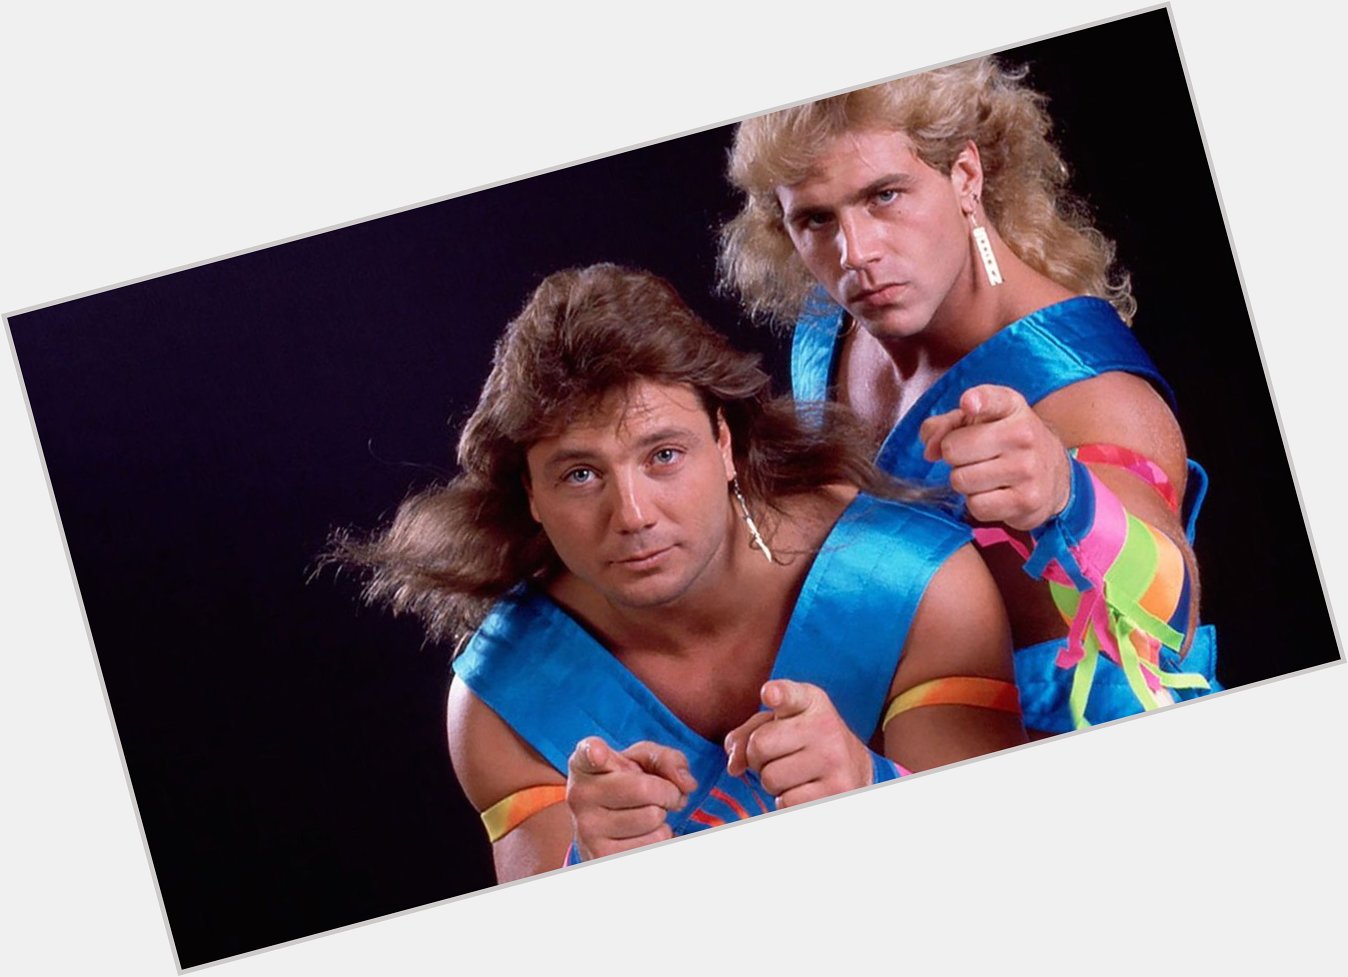 Happy Birthday to one half of the Rockers tag team Marty Jannetty! 